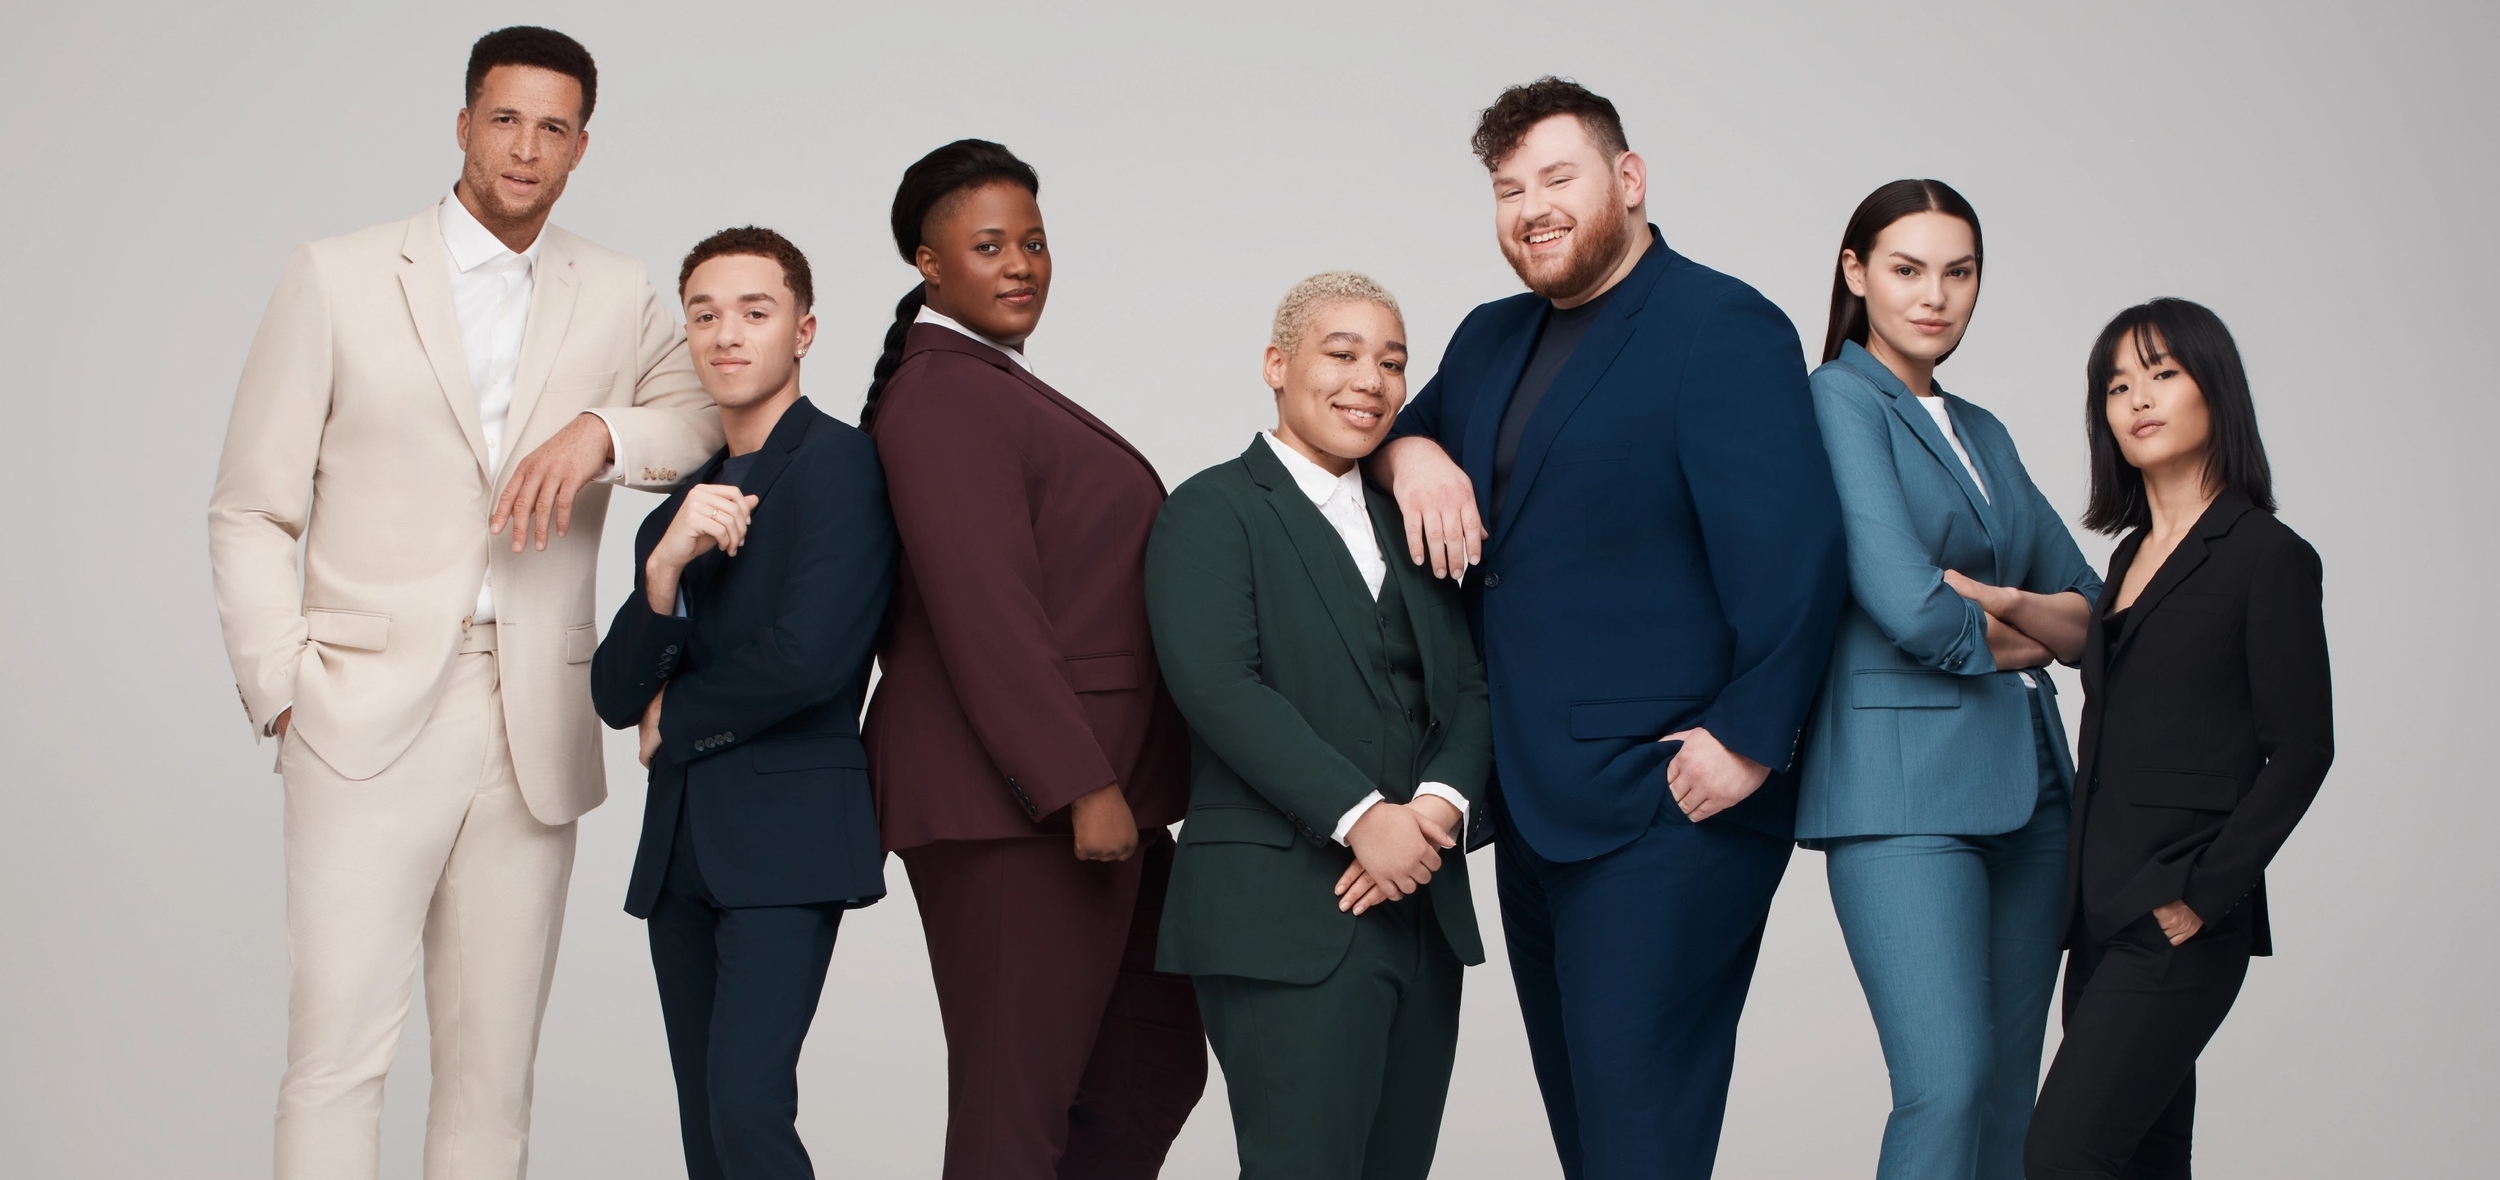 Diverse group of men, women, and nonbinary individuals in perfectly fitting suits for petite and plus sizes.